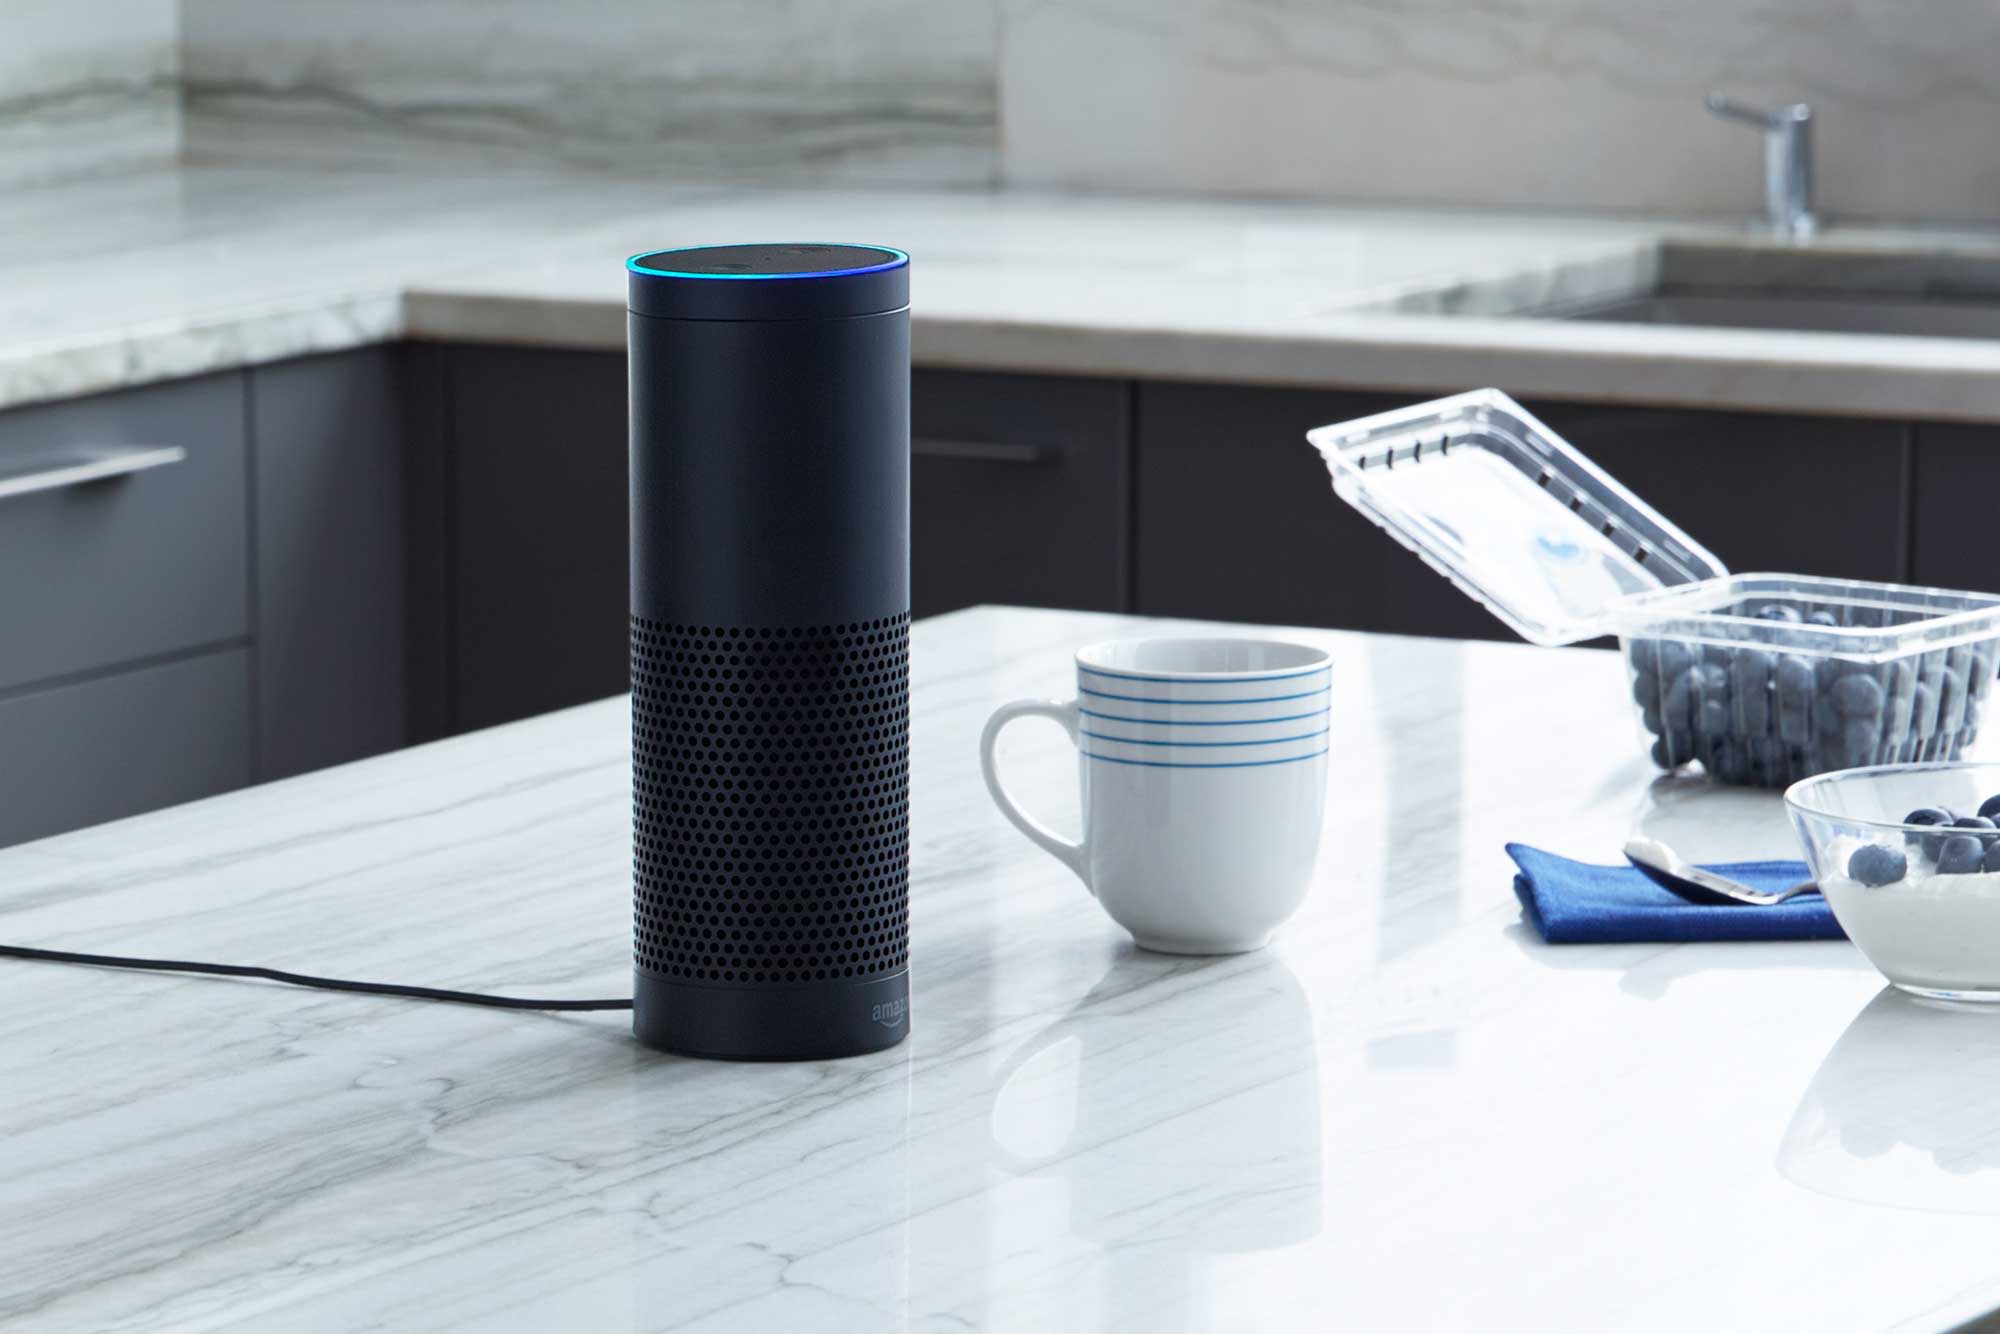 Amazon Echo: How To Play The Same Music And Songs In Multiple Rooms